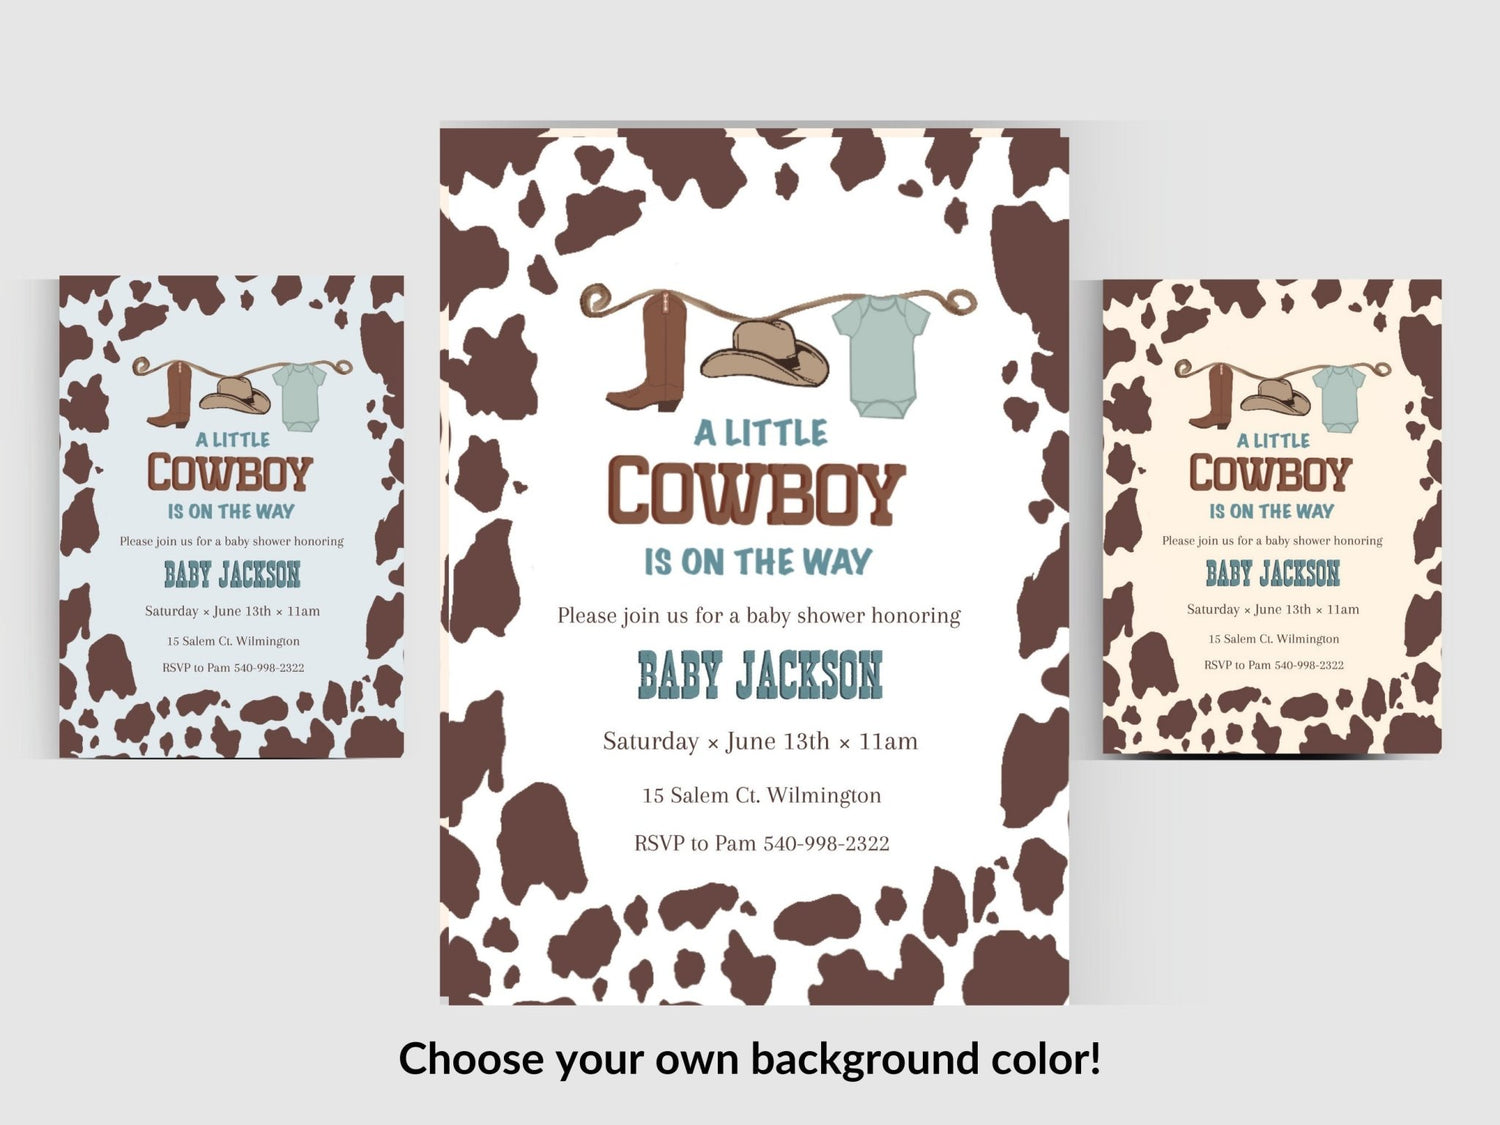 A Little Cowboy is on the Way Baby Shower Invitation Template